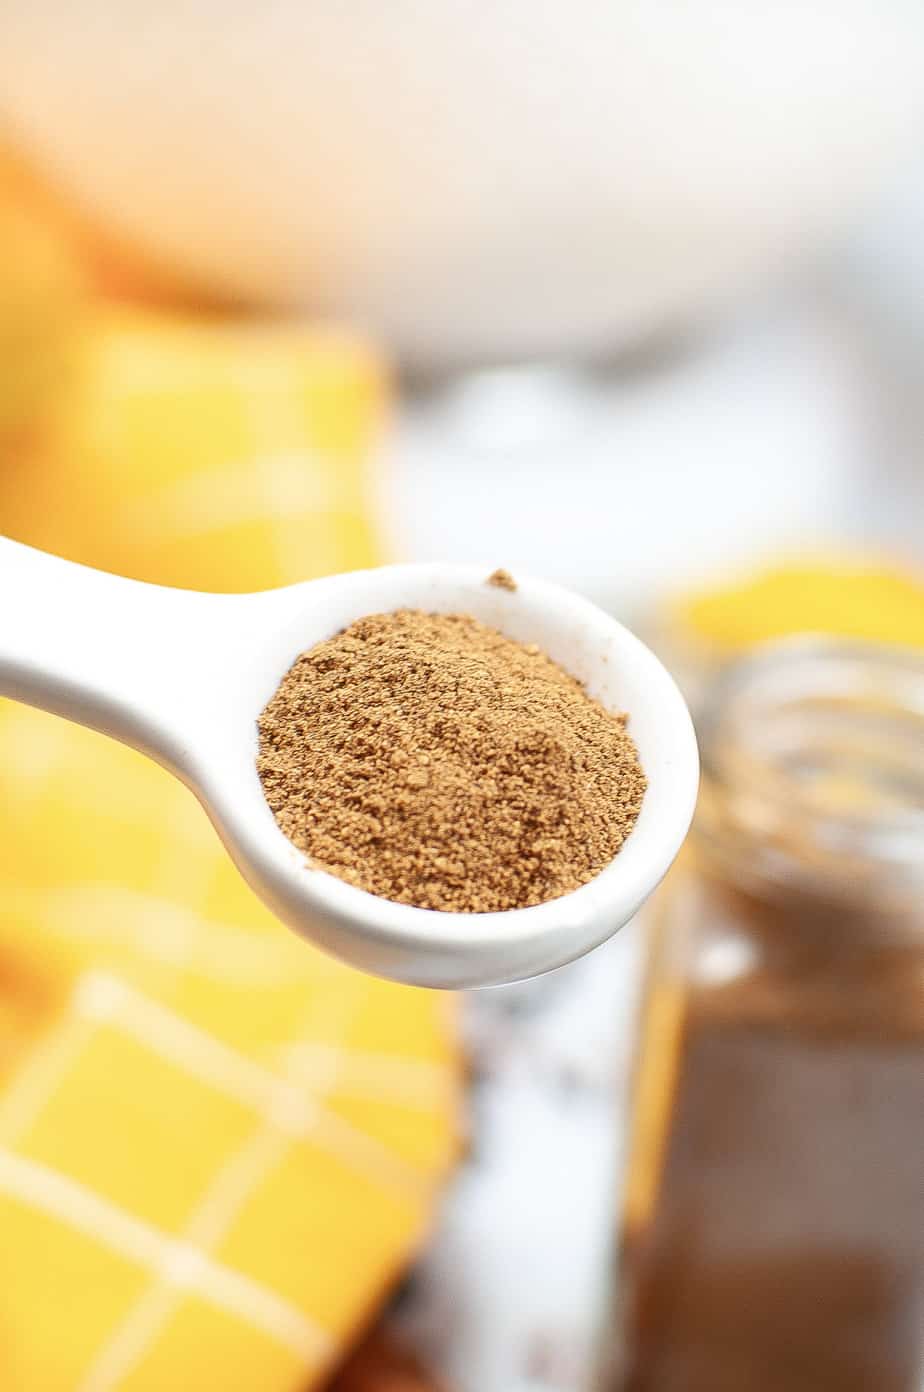 Pumpkin pie spice mix in a measuring spoon up close with a jar of spice mix and a yellow linen in the background on the table.